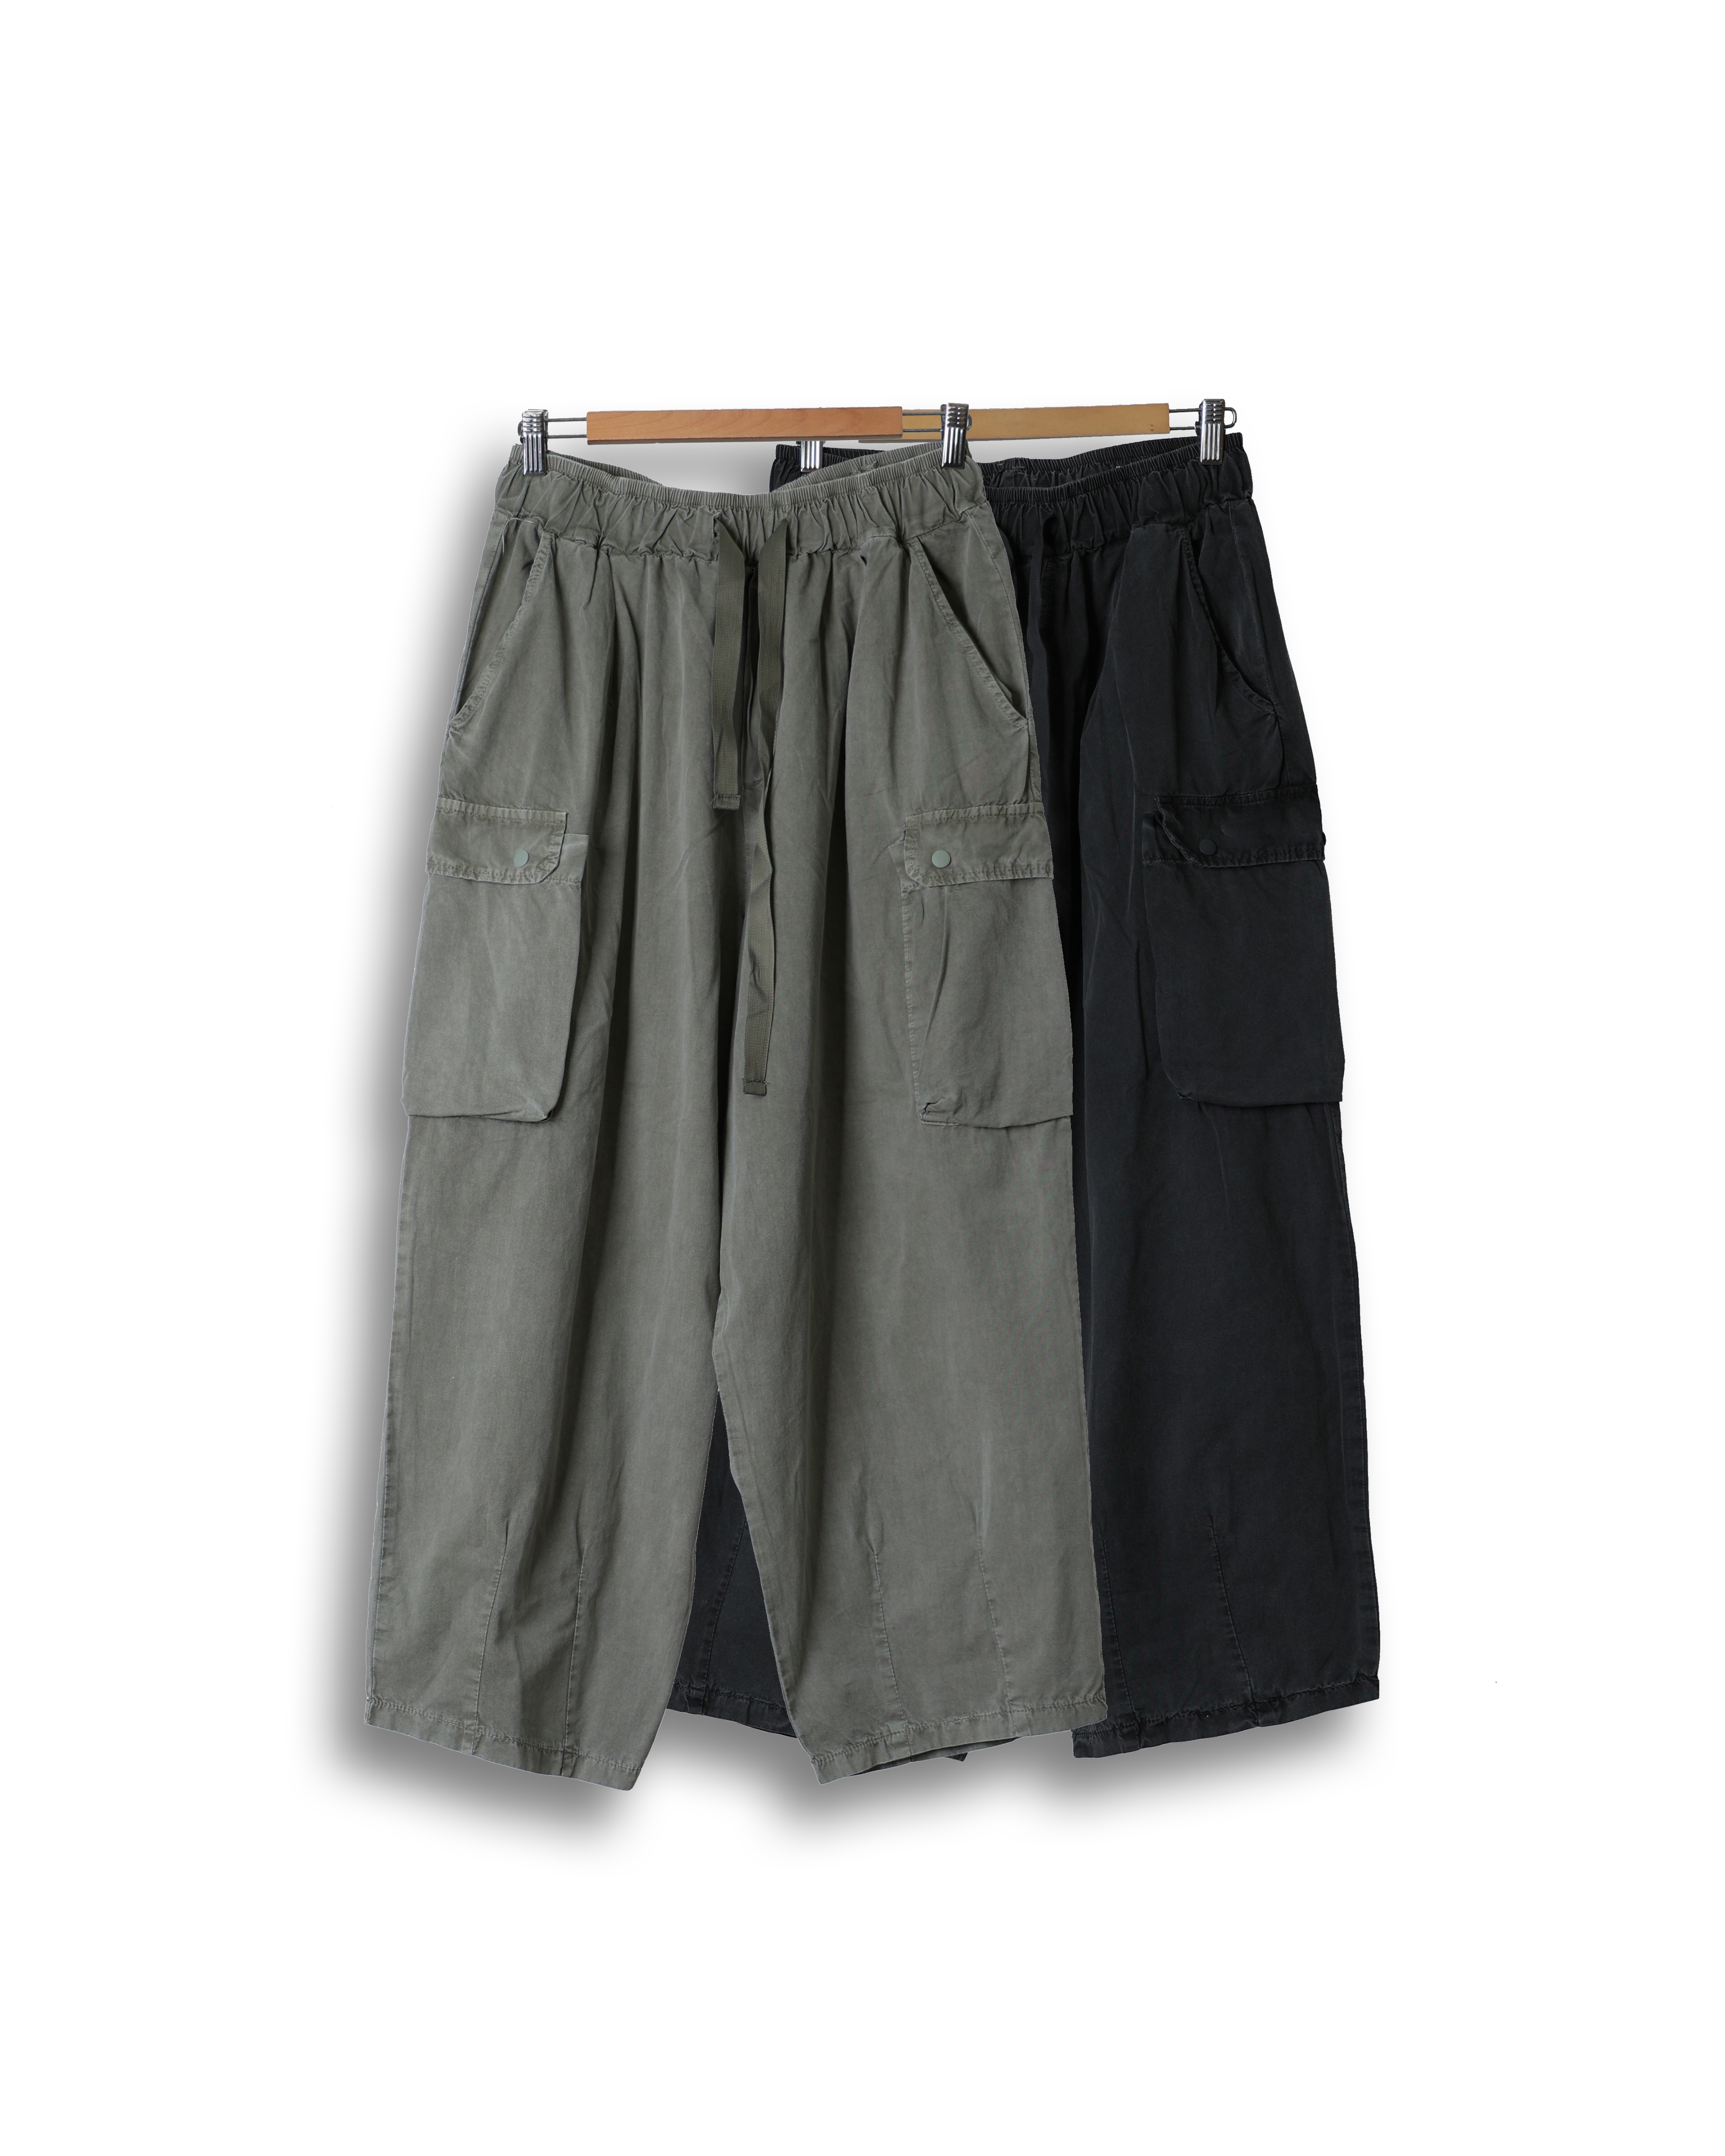 RPEN 525-6 Vintage Cargo Balloon Pants (Charcoal/Olive)